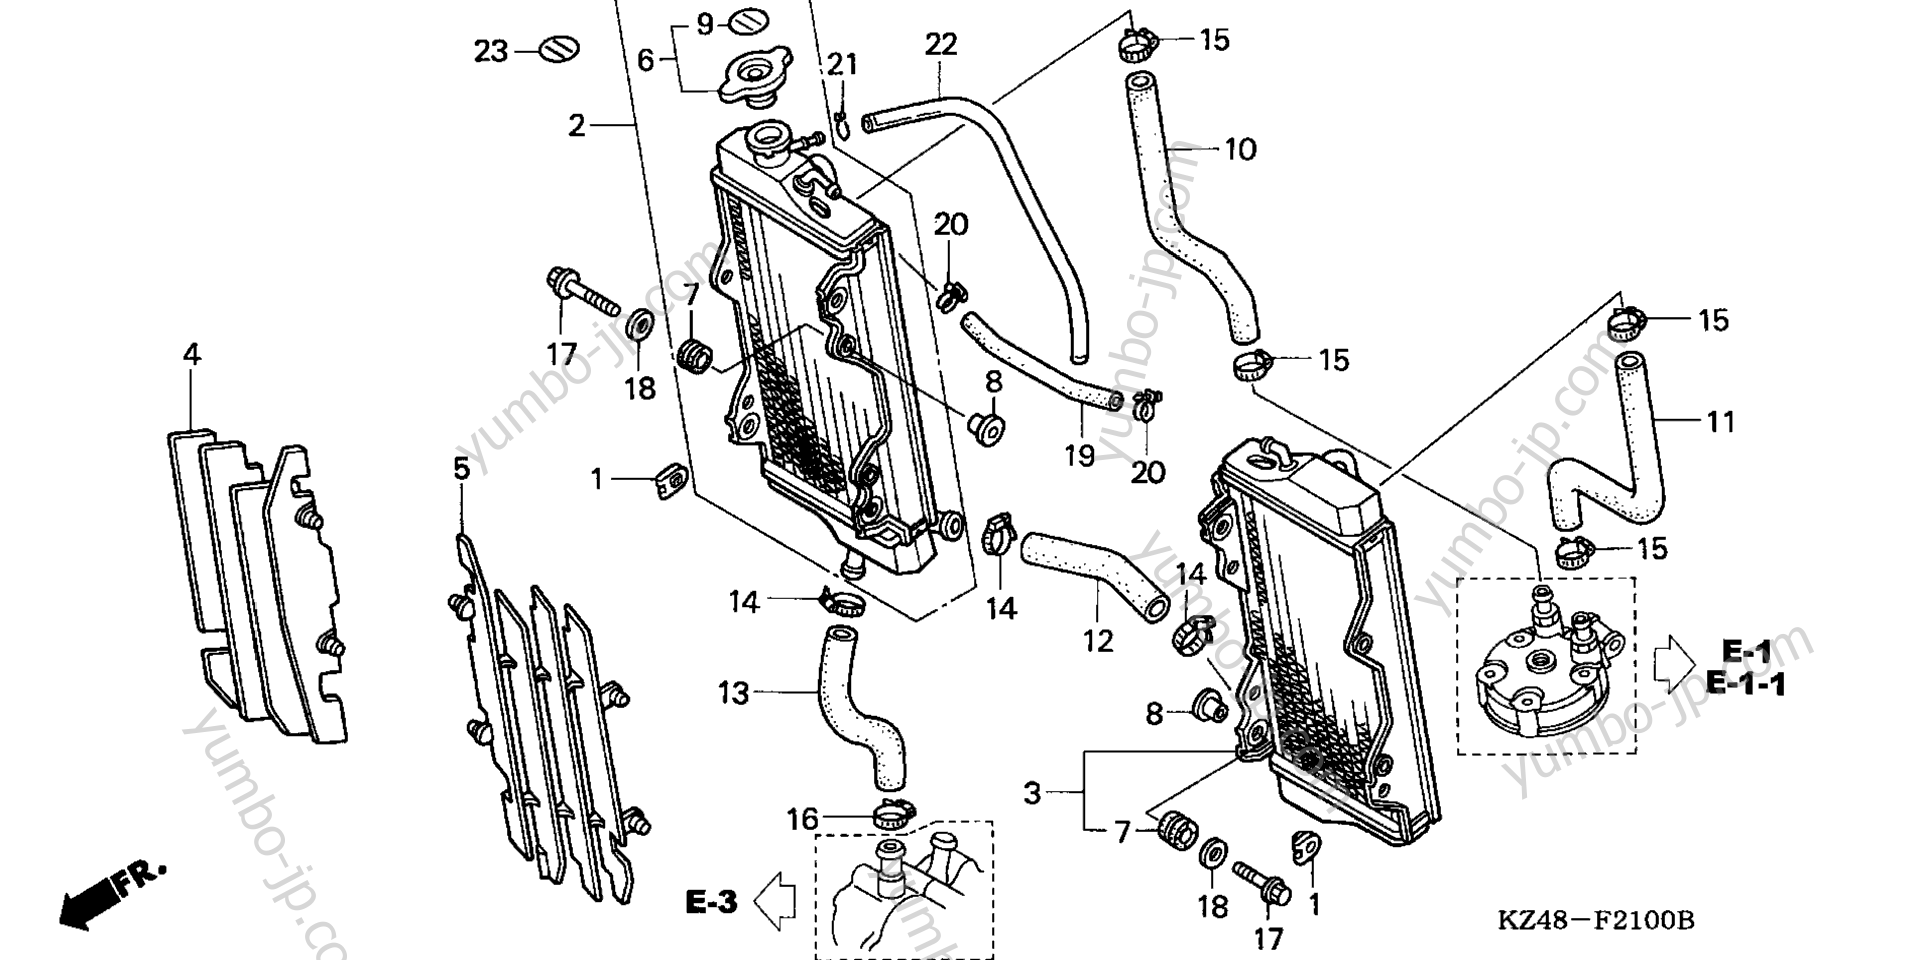 RADIATOR ('02-'04) for motorcycles HONDA CR125R A 2002 year